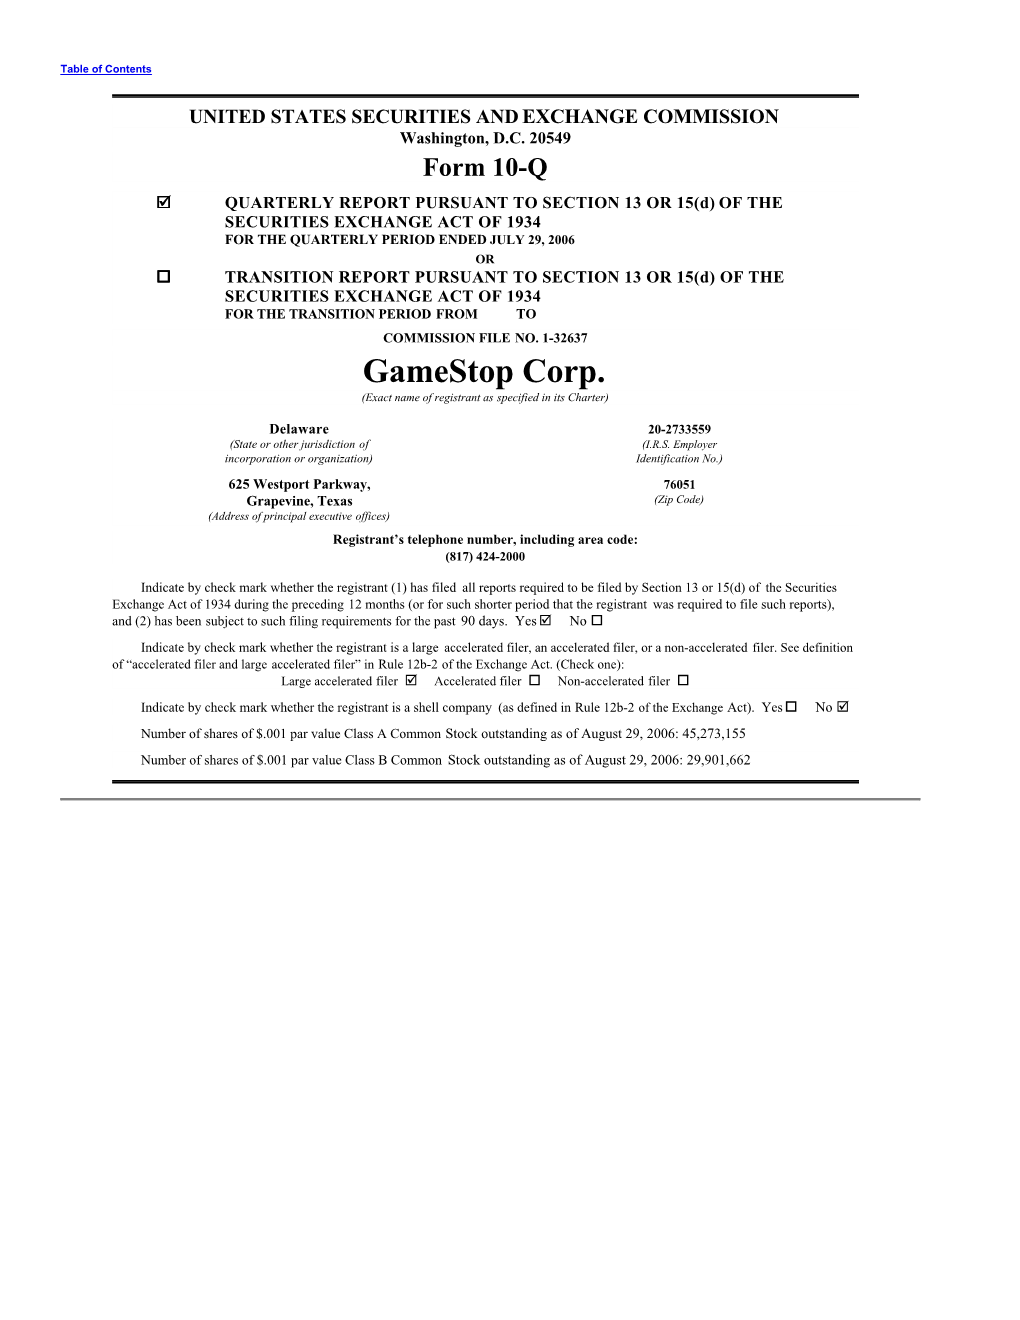 Gamestop Corp. (Exact Name of Registrant As Specified in Its Charter)